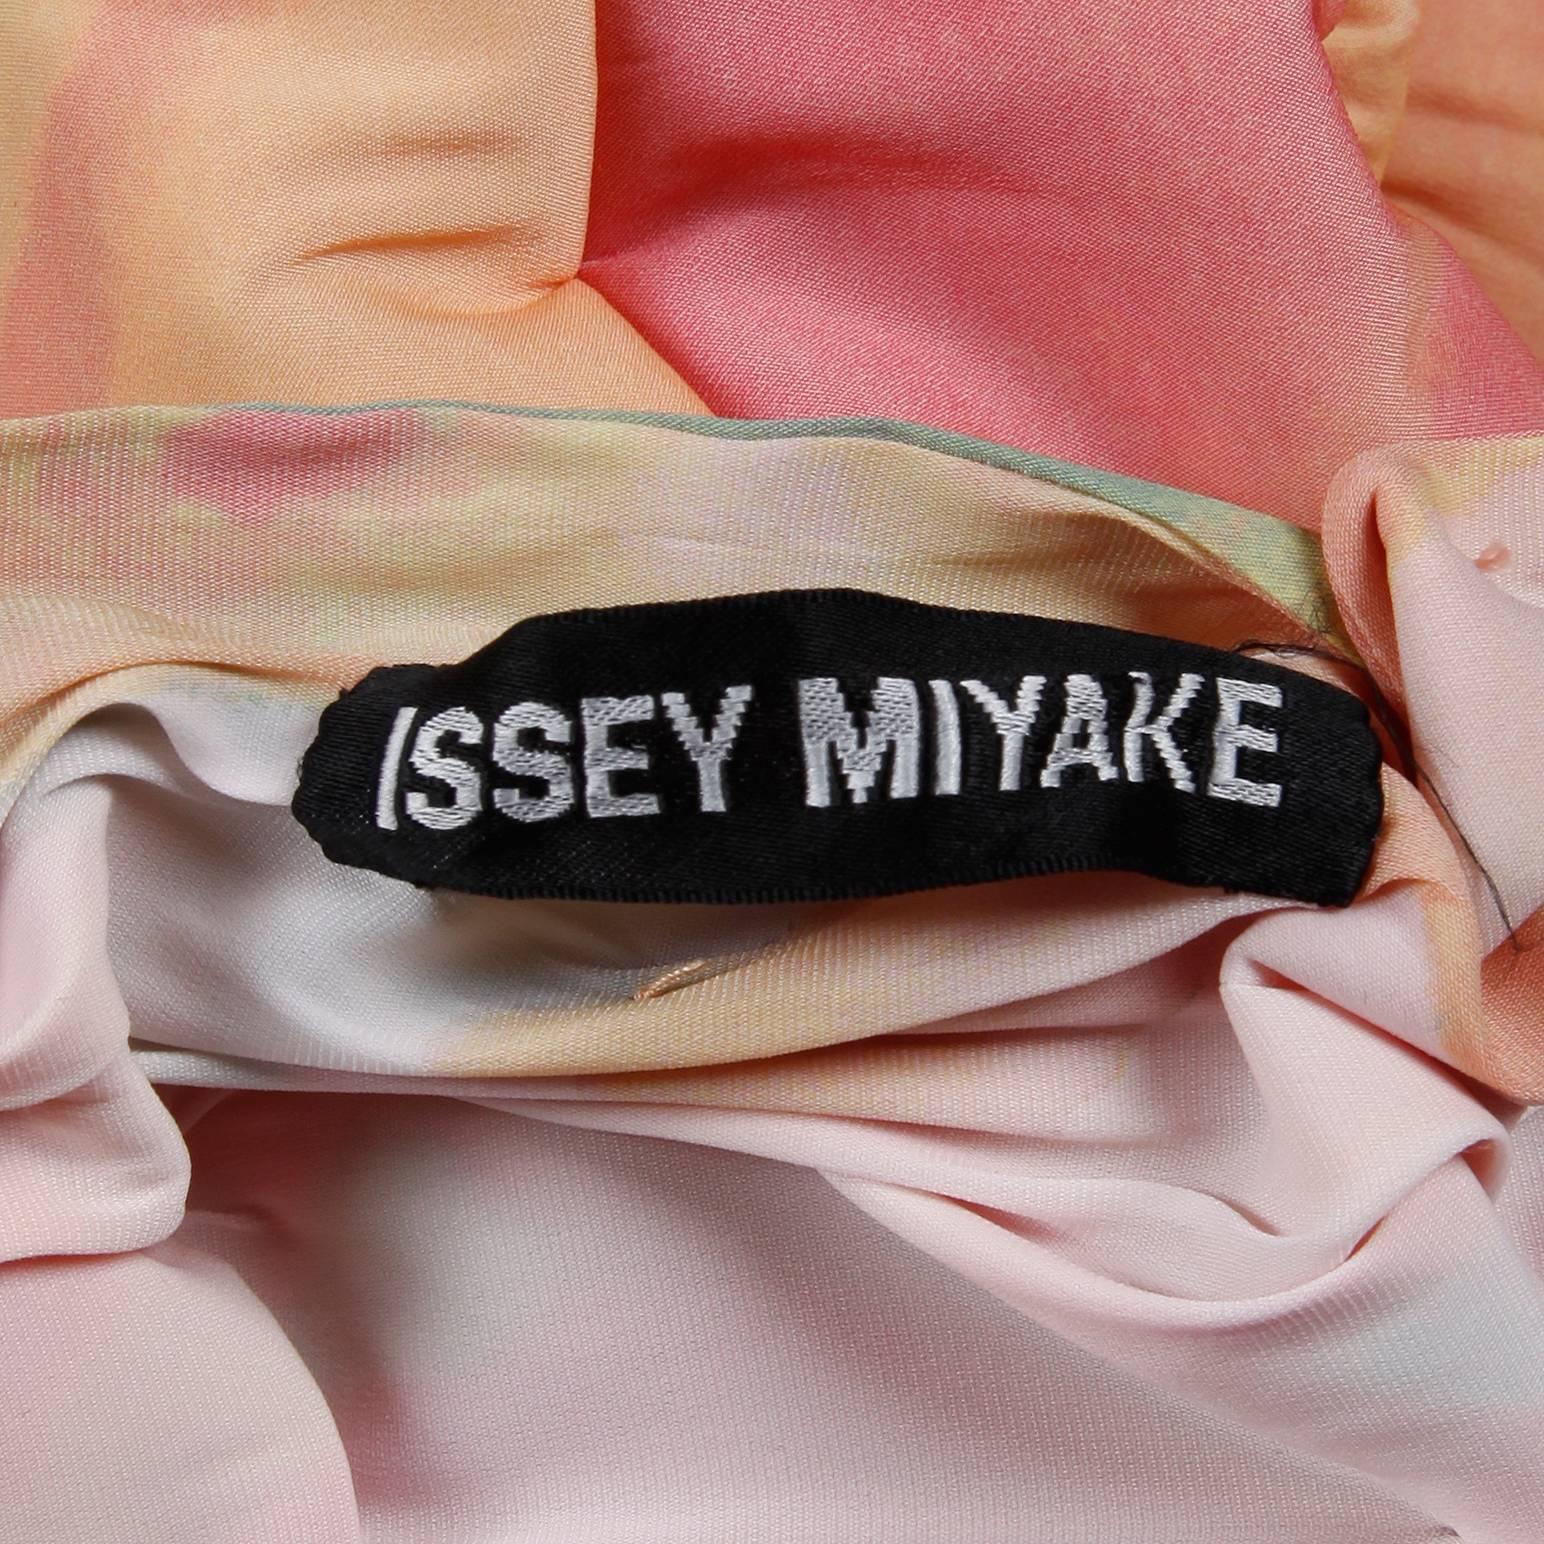 Incredible vintage multicolor jacket by Issey Miyake. Unlined with front button closure. Fits like a modern size medium. The bust measures 44